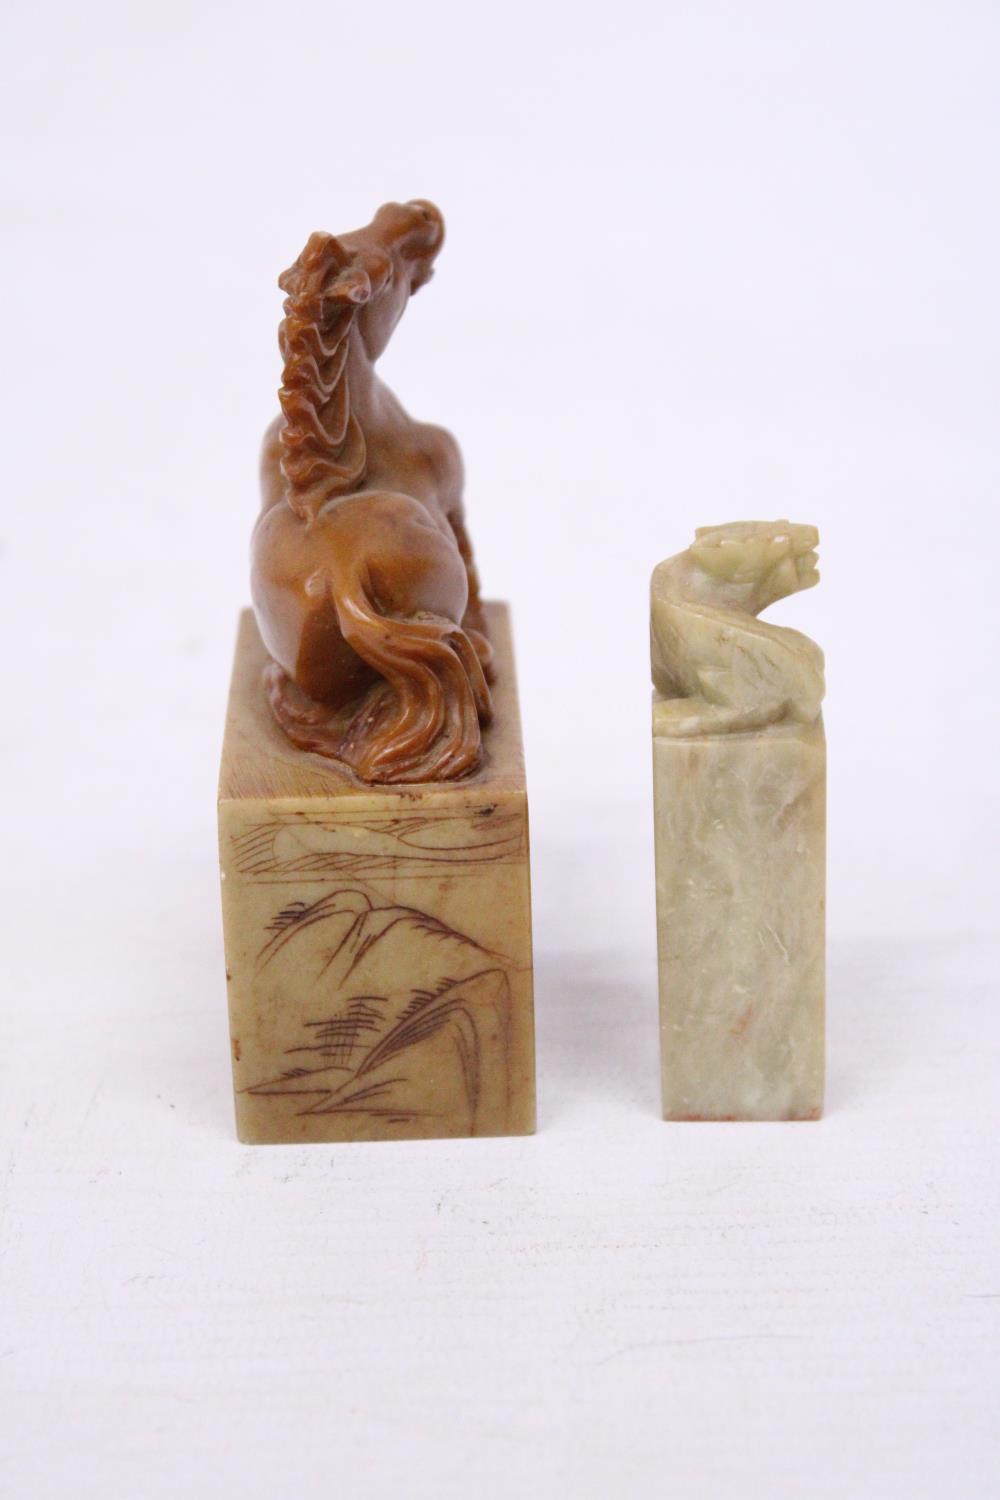 A CHINESE CARVED SOAPSTONE SEAL DEPICTING A REARING HORSE TOGETHER WITH A LION SEAL CARVING - Image 2 of 6